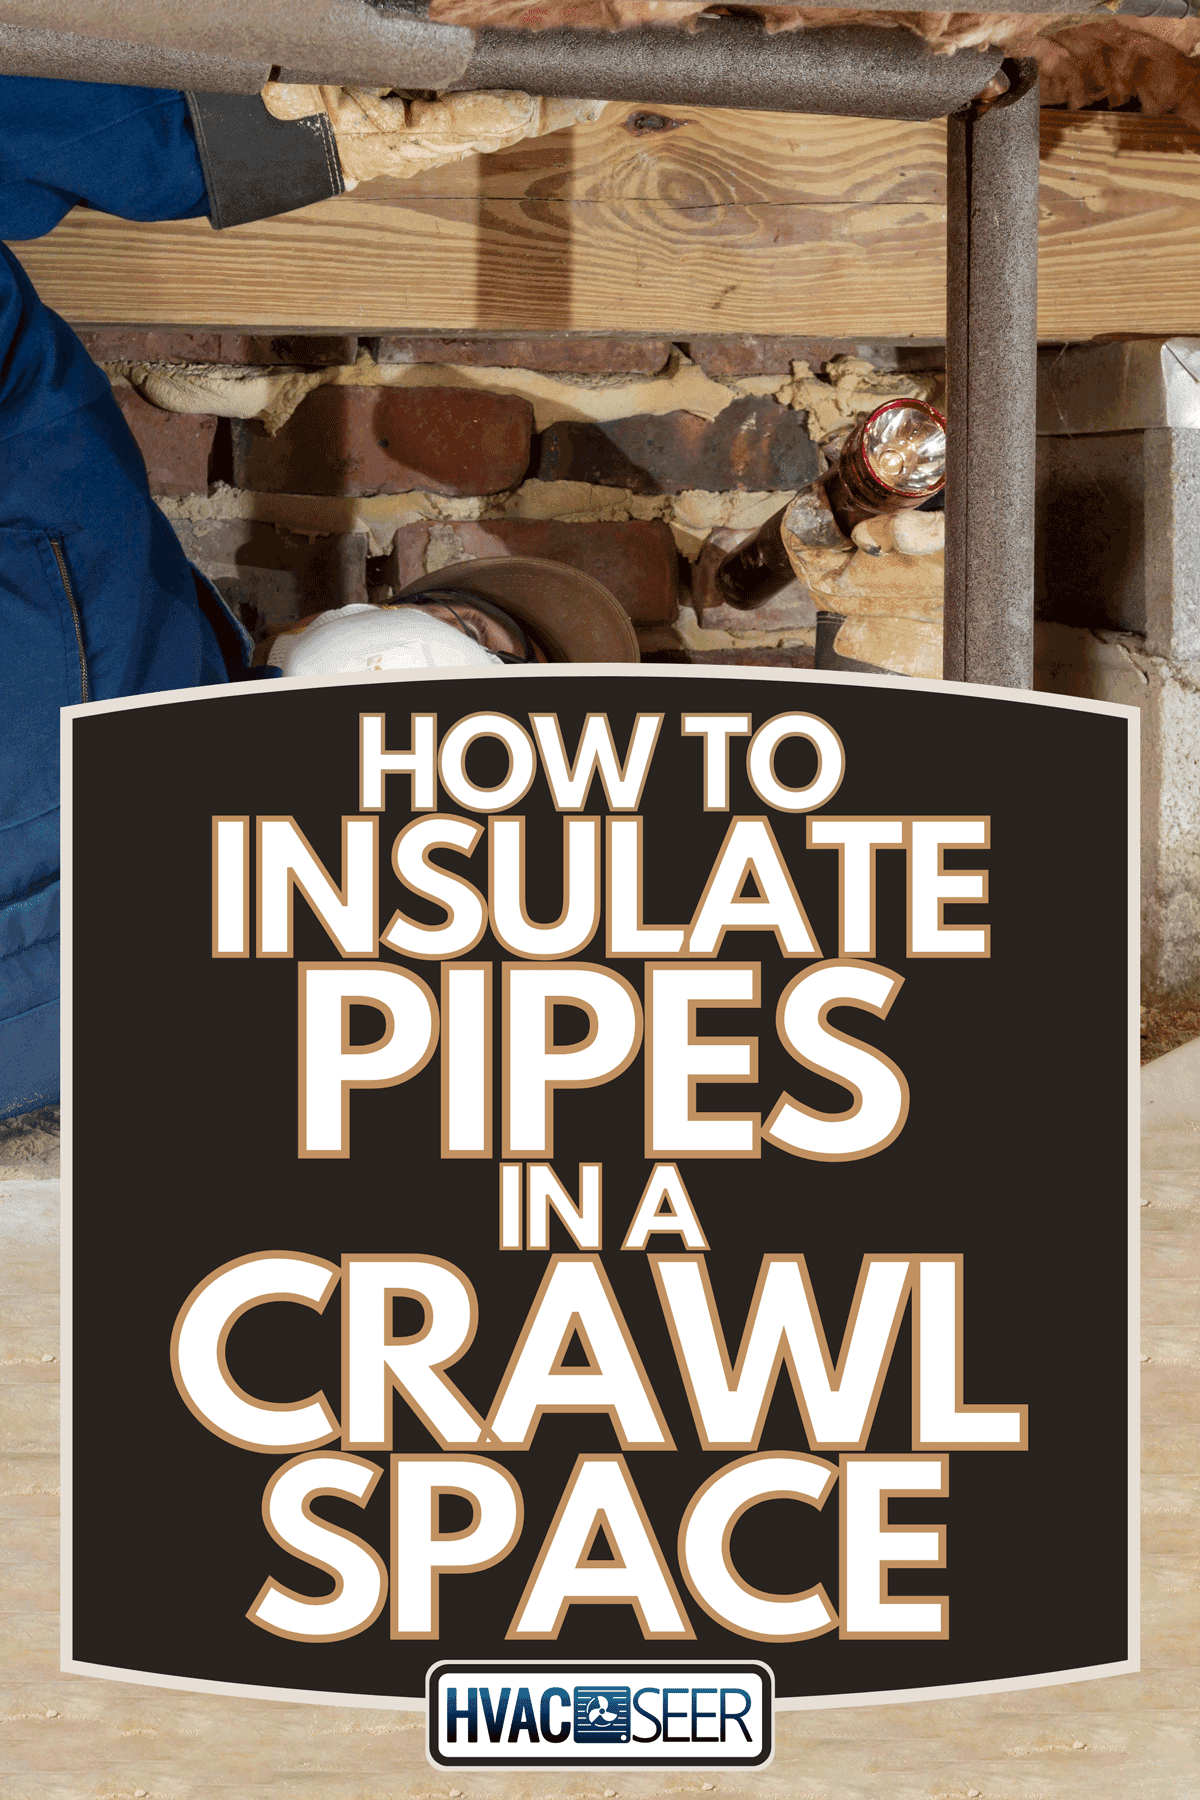 Home inspector examines a freeze protected crawl space water line, How To Insulate Pipes In A Crawl Space